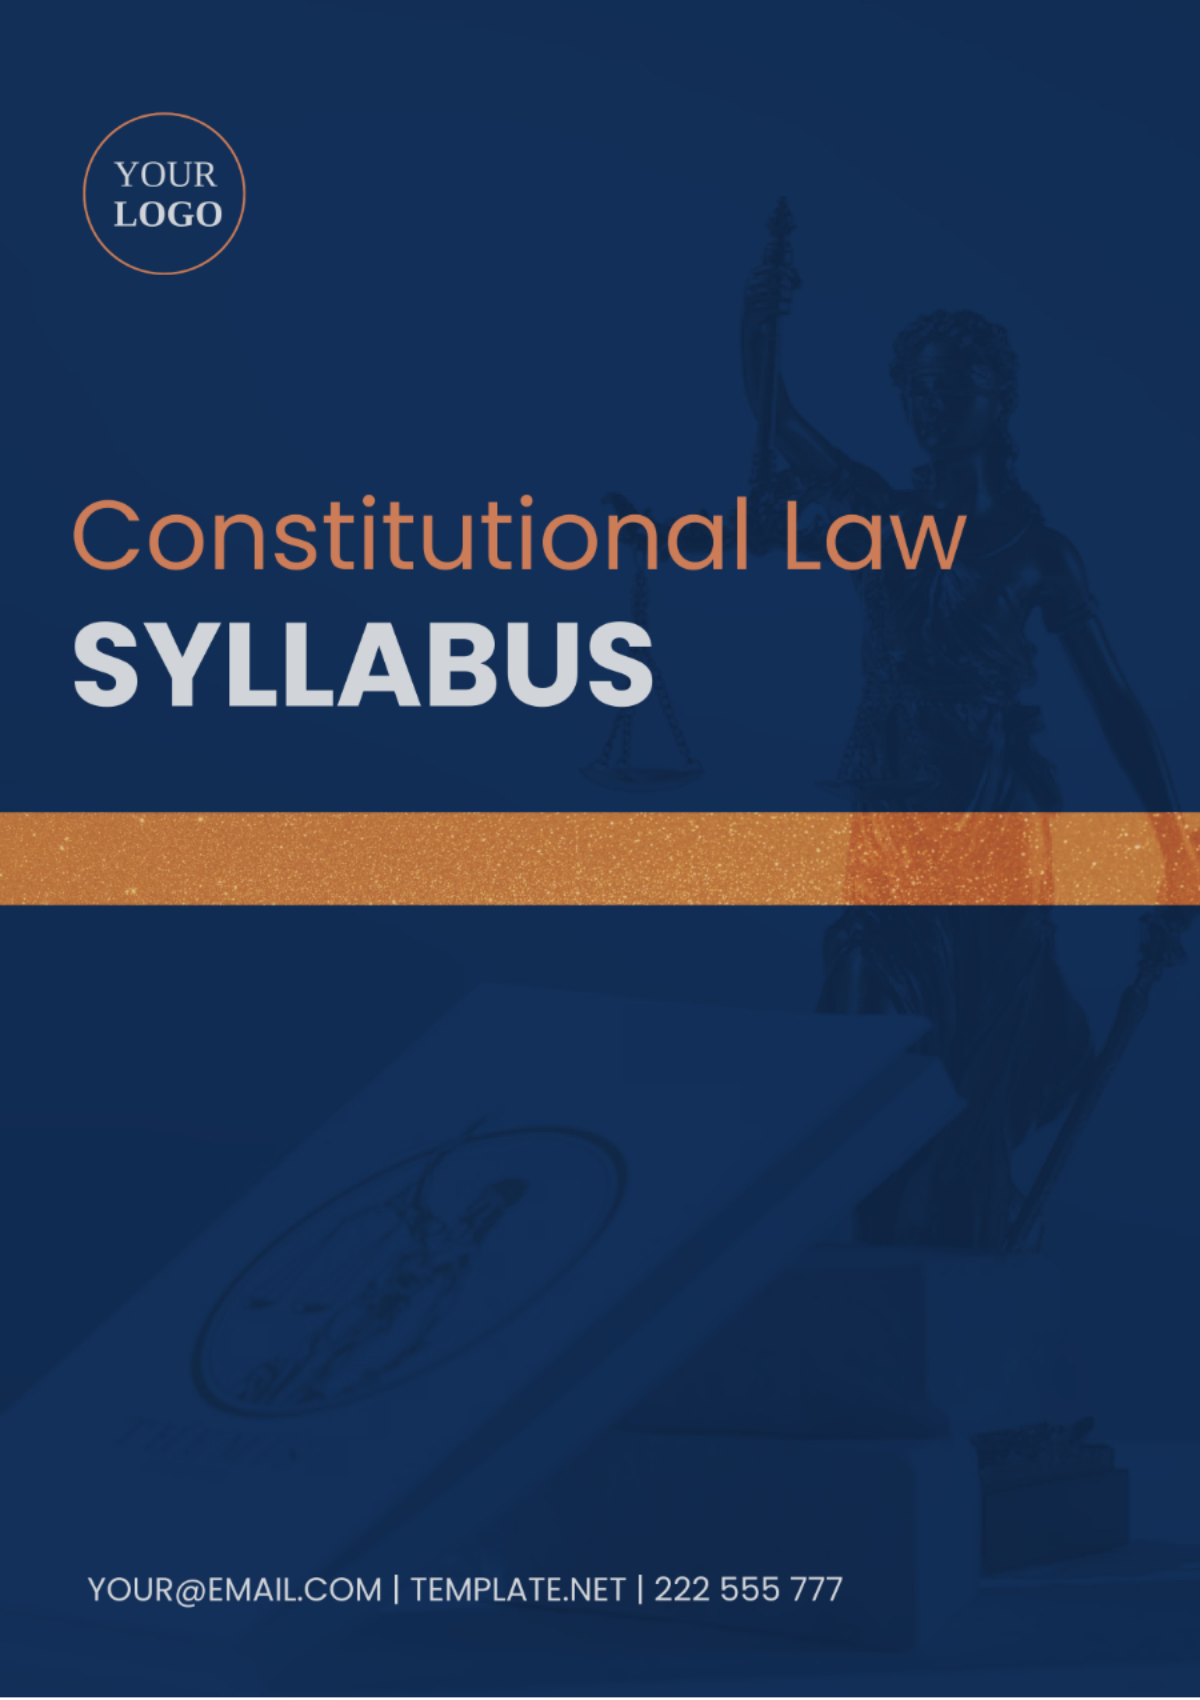 Constitutional Law Syllabus Template